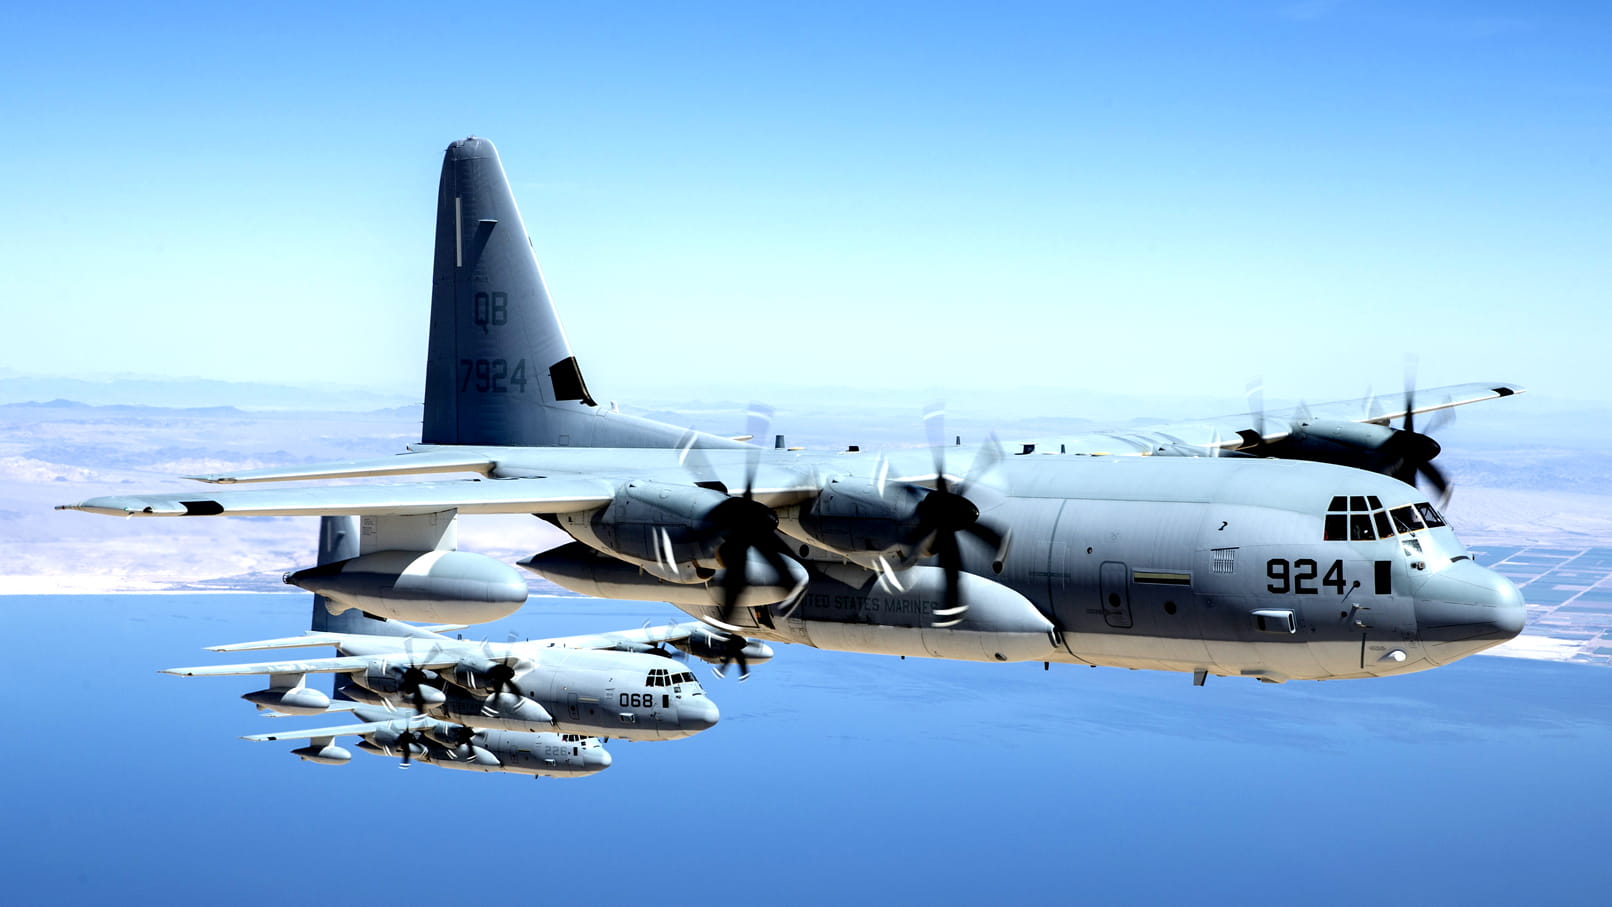 Military C-130 planes flying together